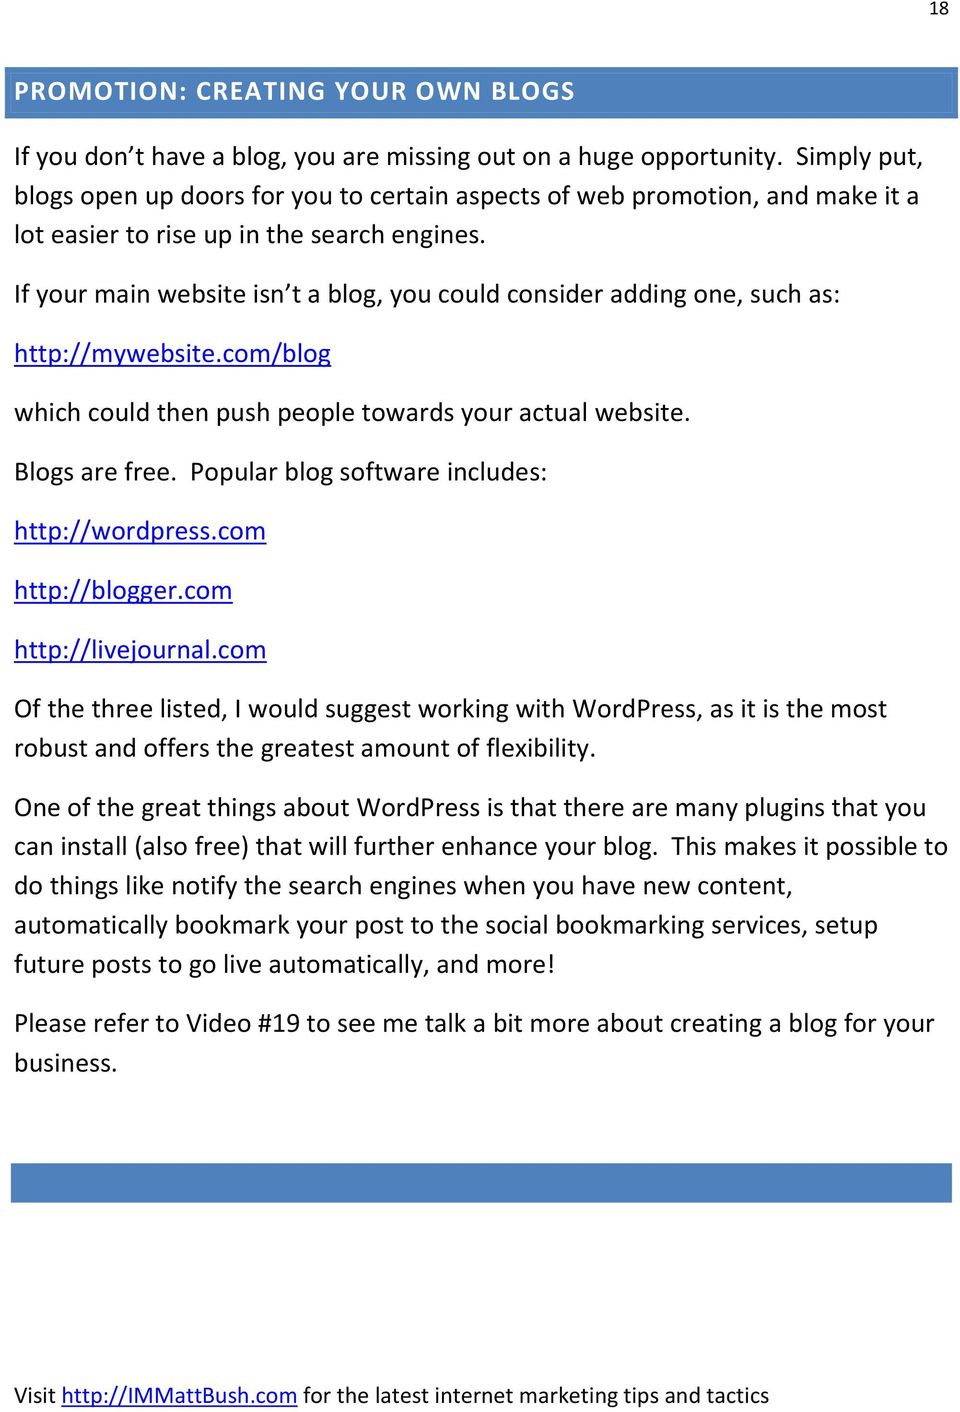 If your main website isn t a blog, you could consider adding one, such as: http://mywebsite.com/blog which could then push people towards your actual website. Blogs are free.